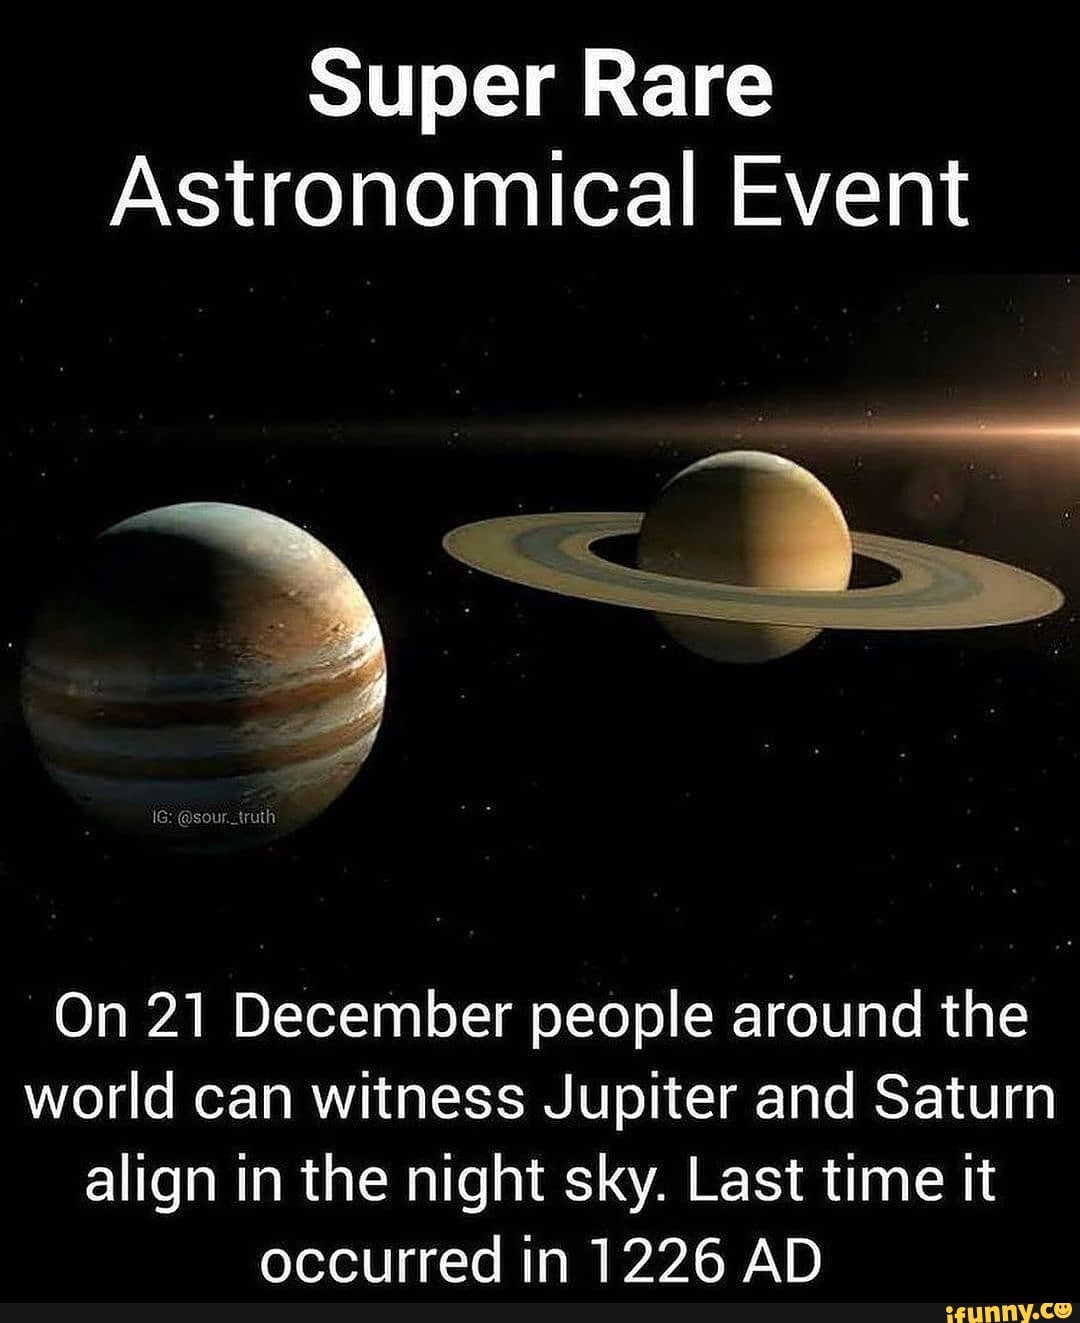 Super Rare Astronomical Event On 21 December people around the world